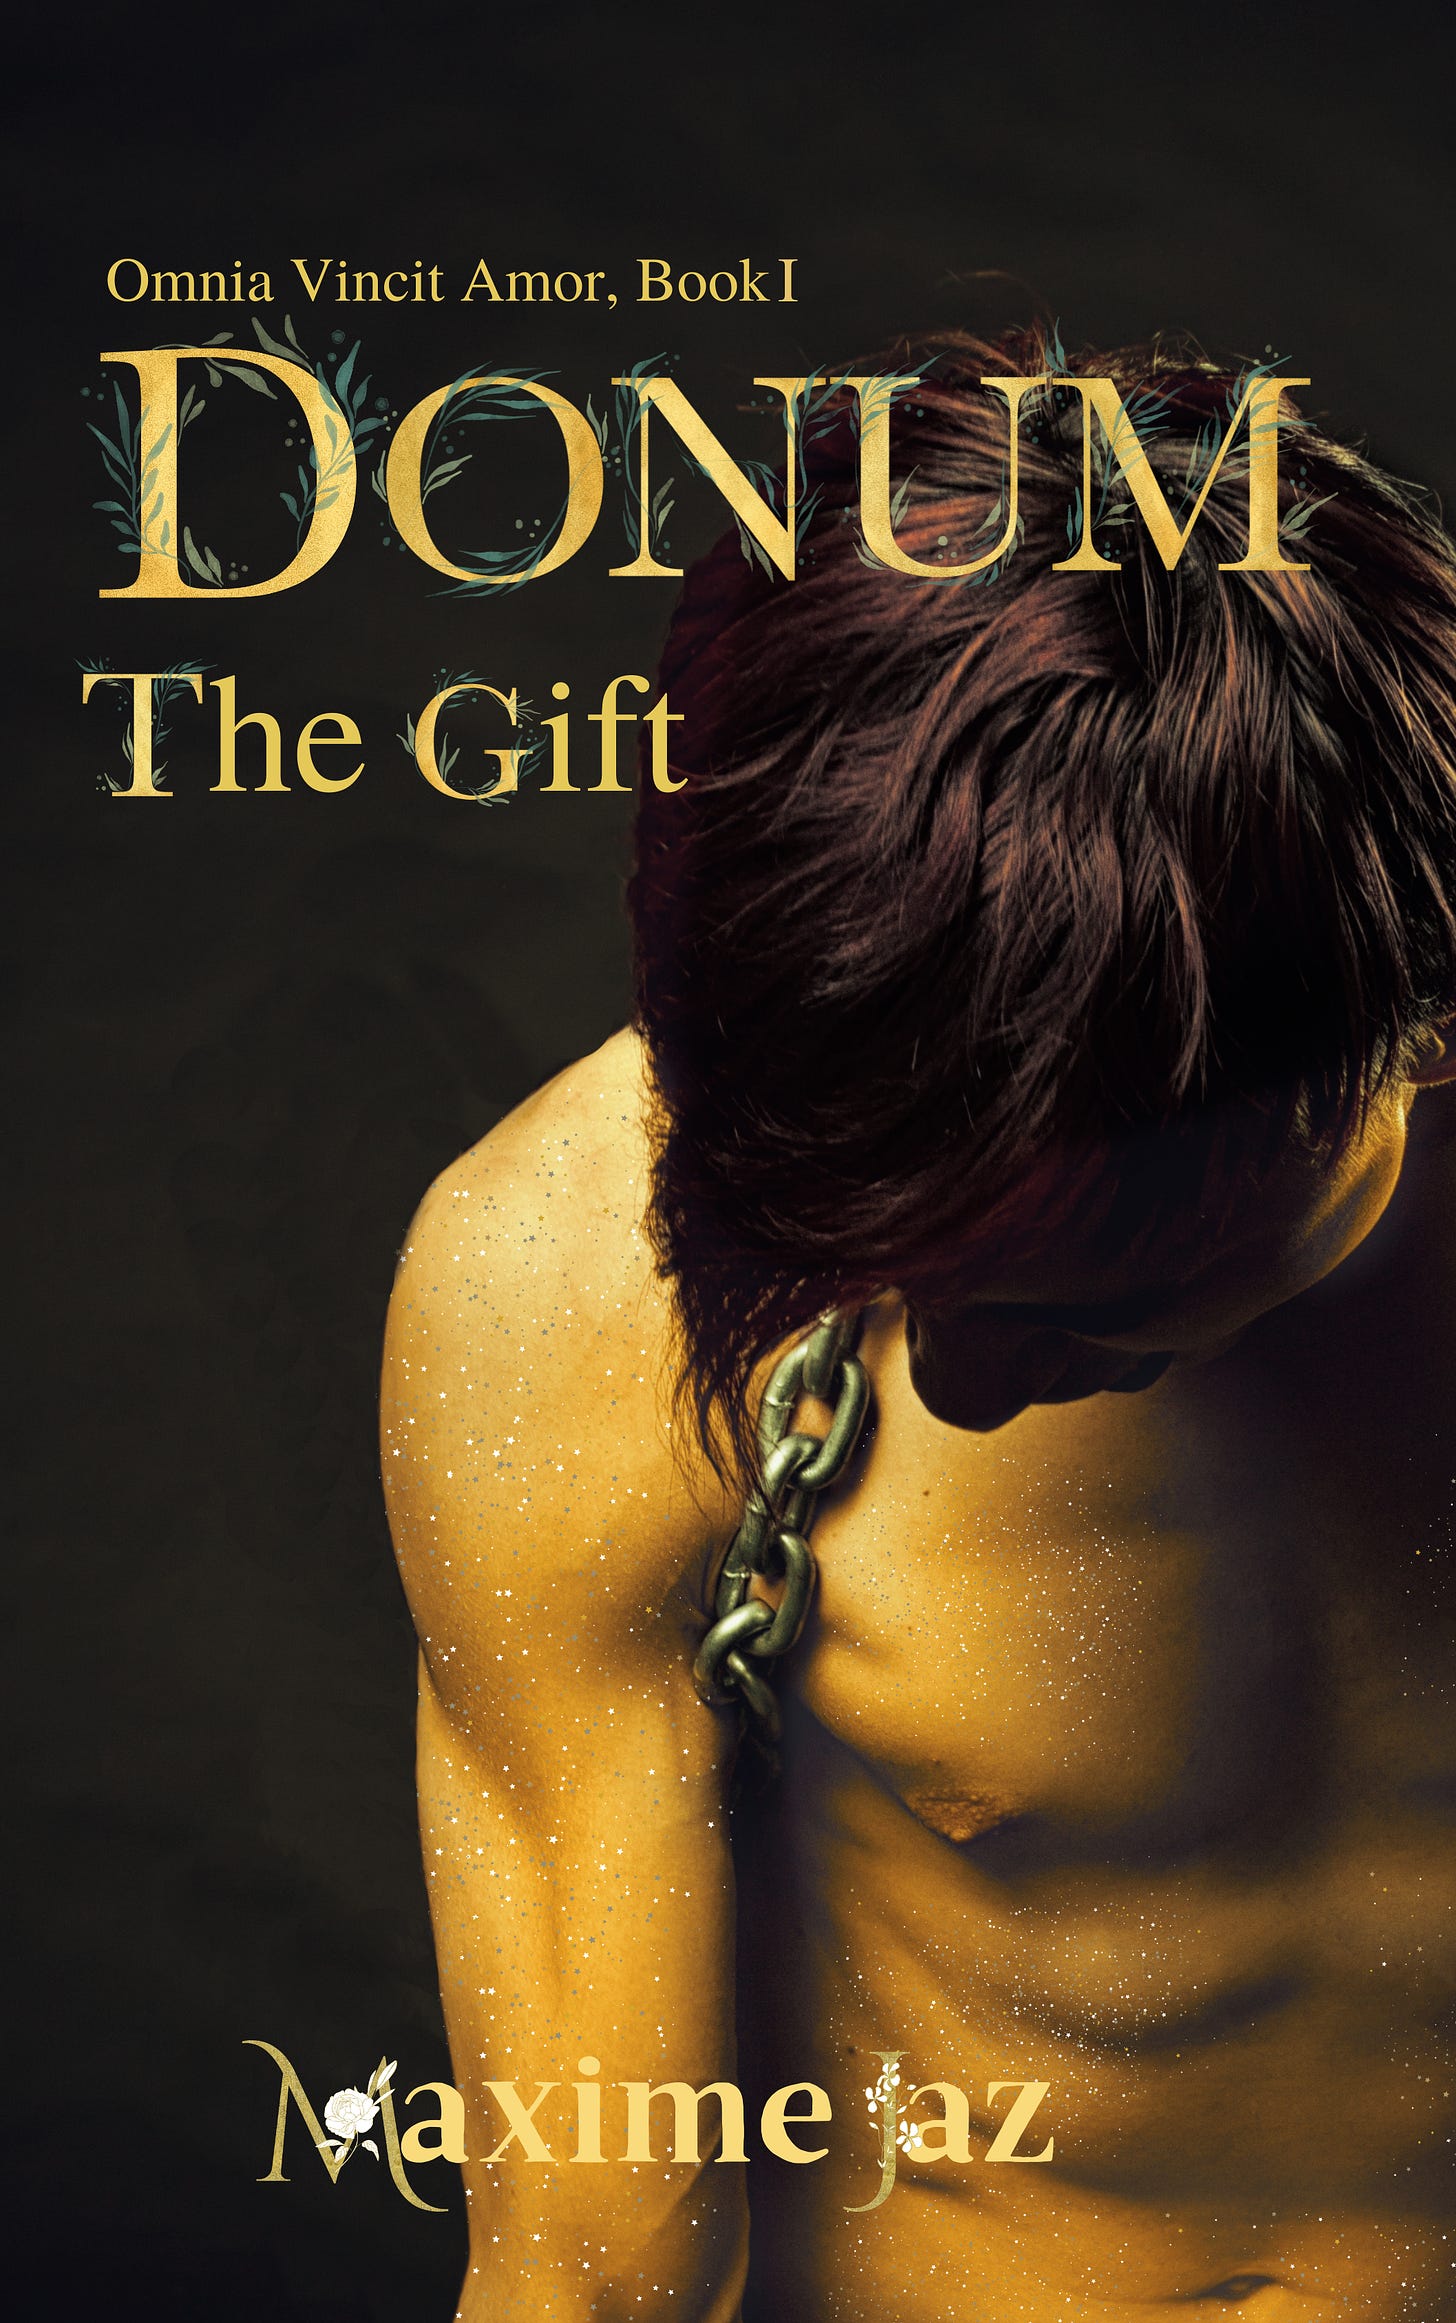 book cover for Donum by Maxime Jaz. Omnia Vincit Amor Book 1 Donum the Gift all in yellow letters wrought with laurel leaves. A young man with golden skin stands head lowered, a chain snaking down from his neck to his armpit. He has brown hair.